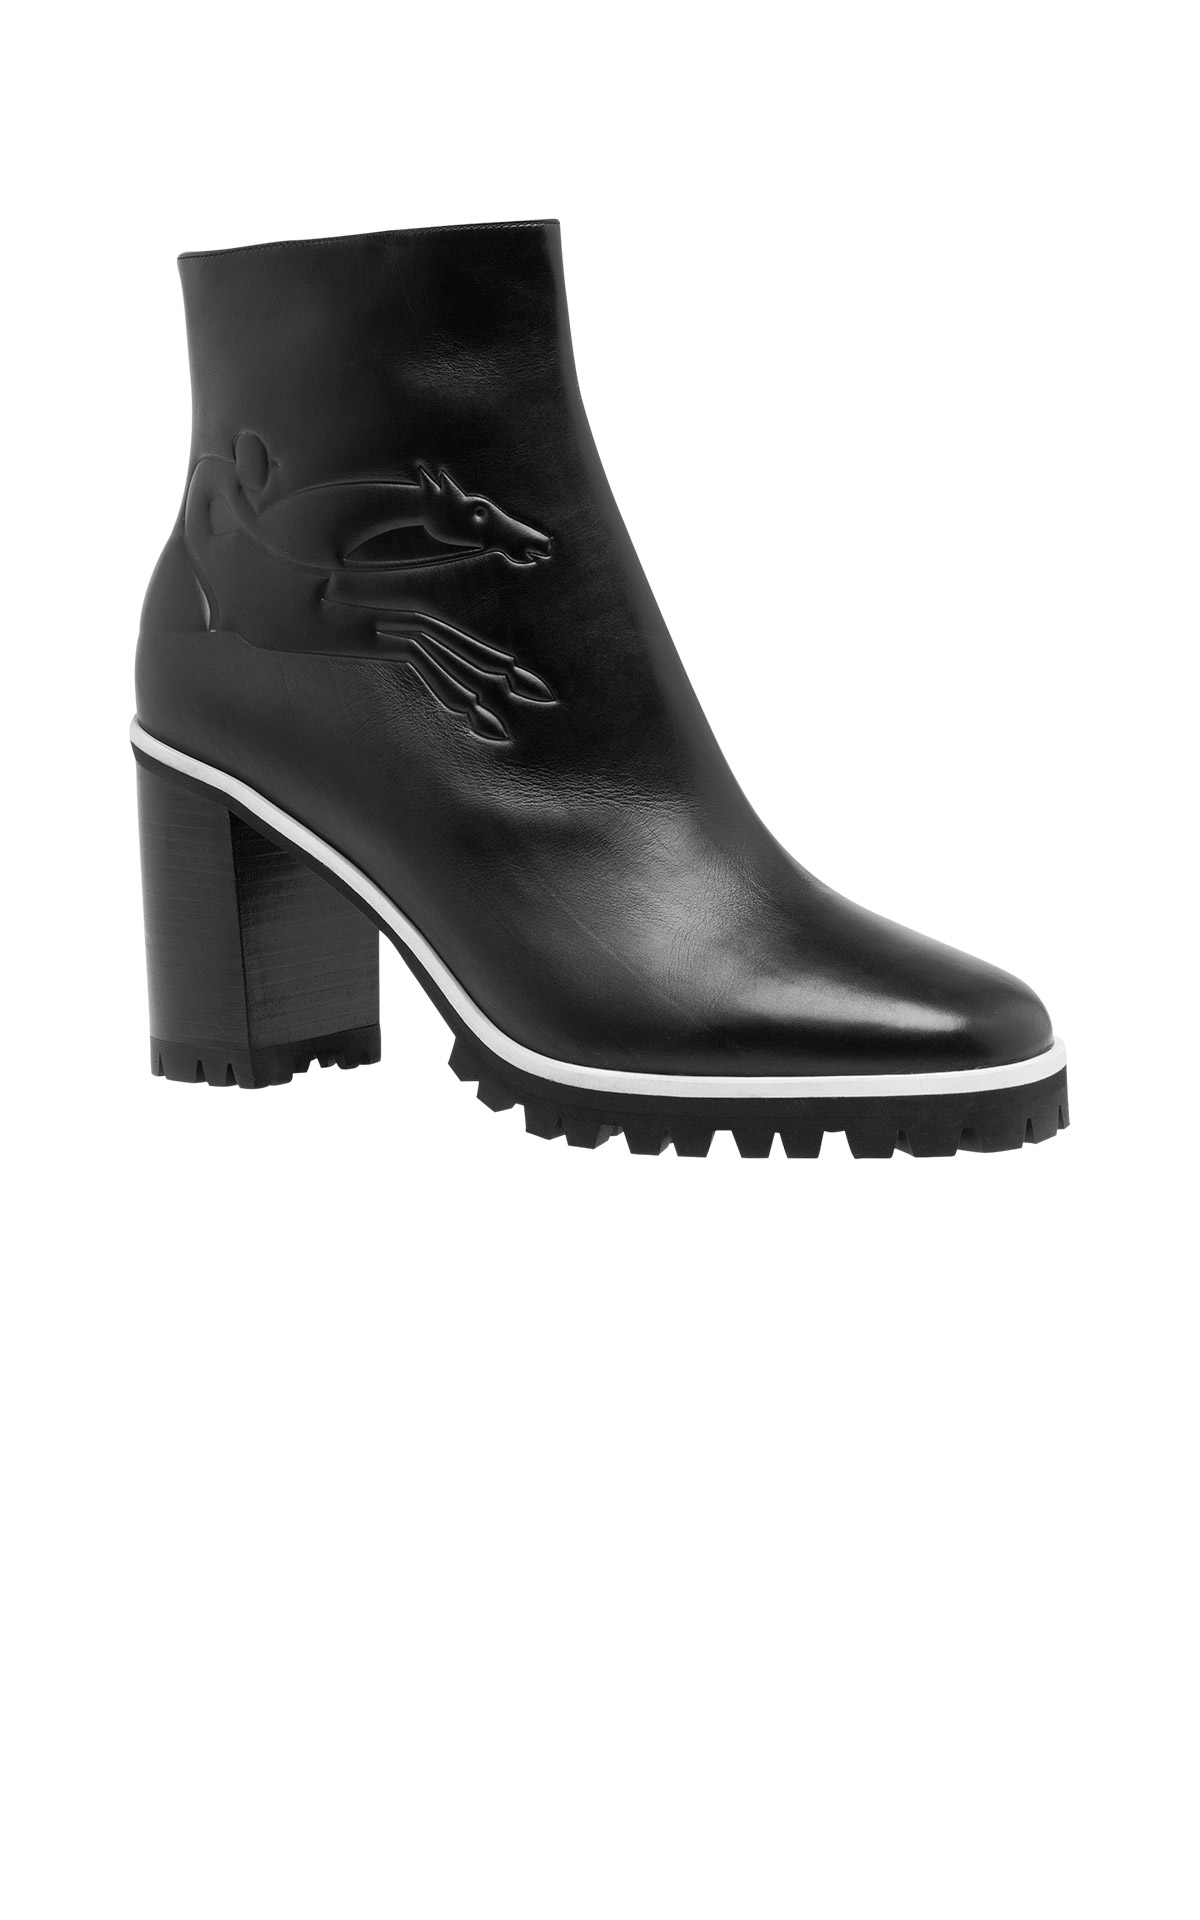 Black leather ankle boot longhcamp